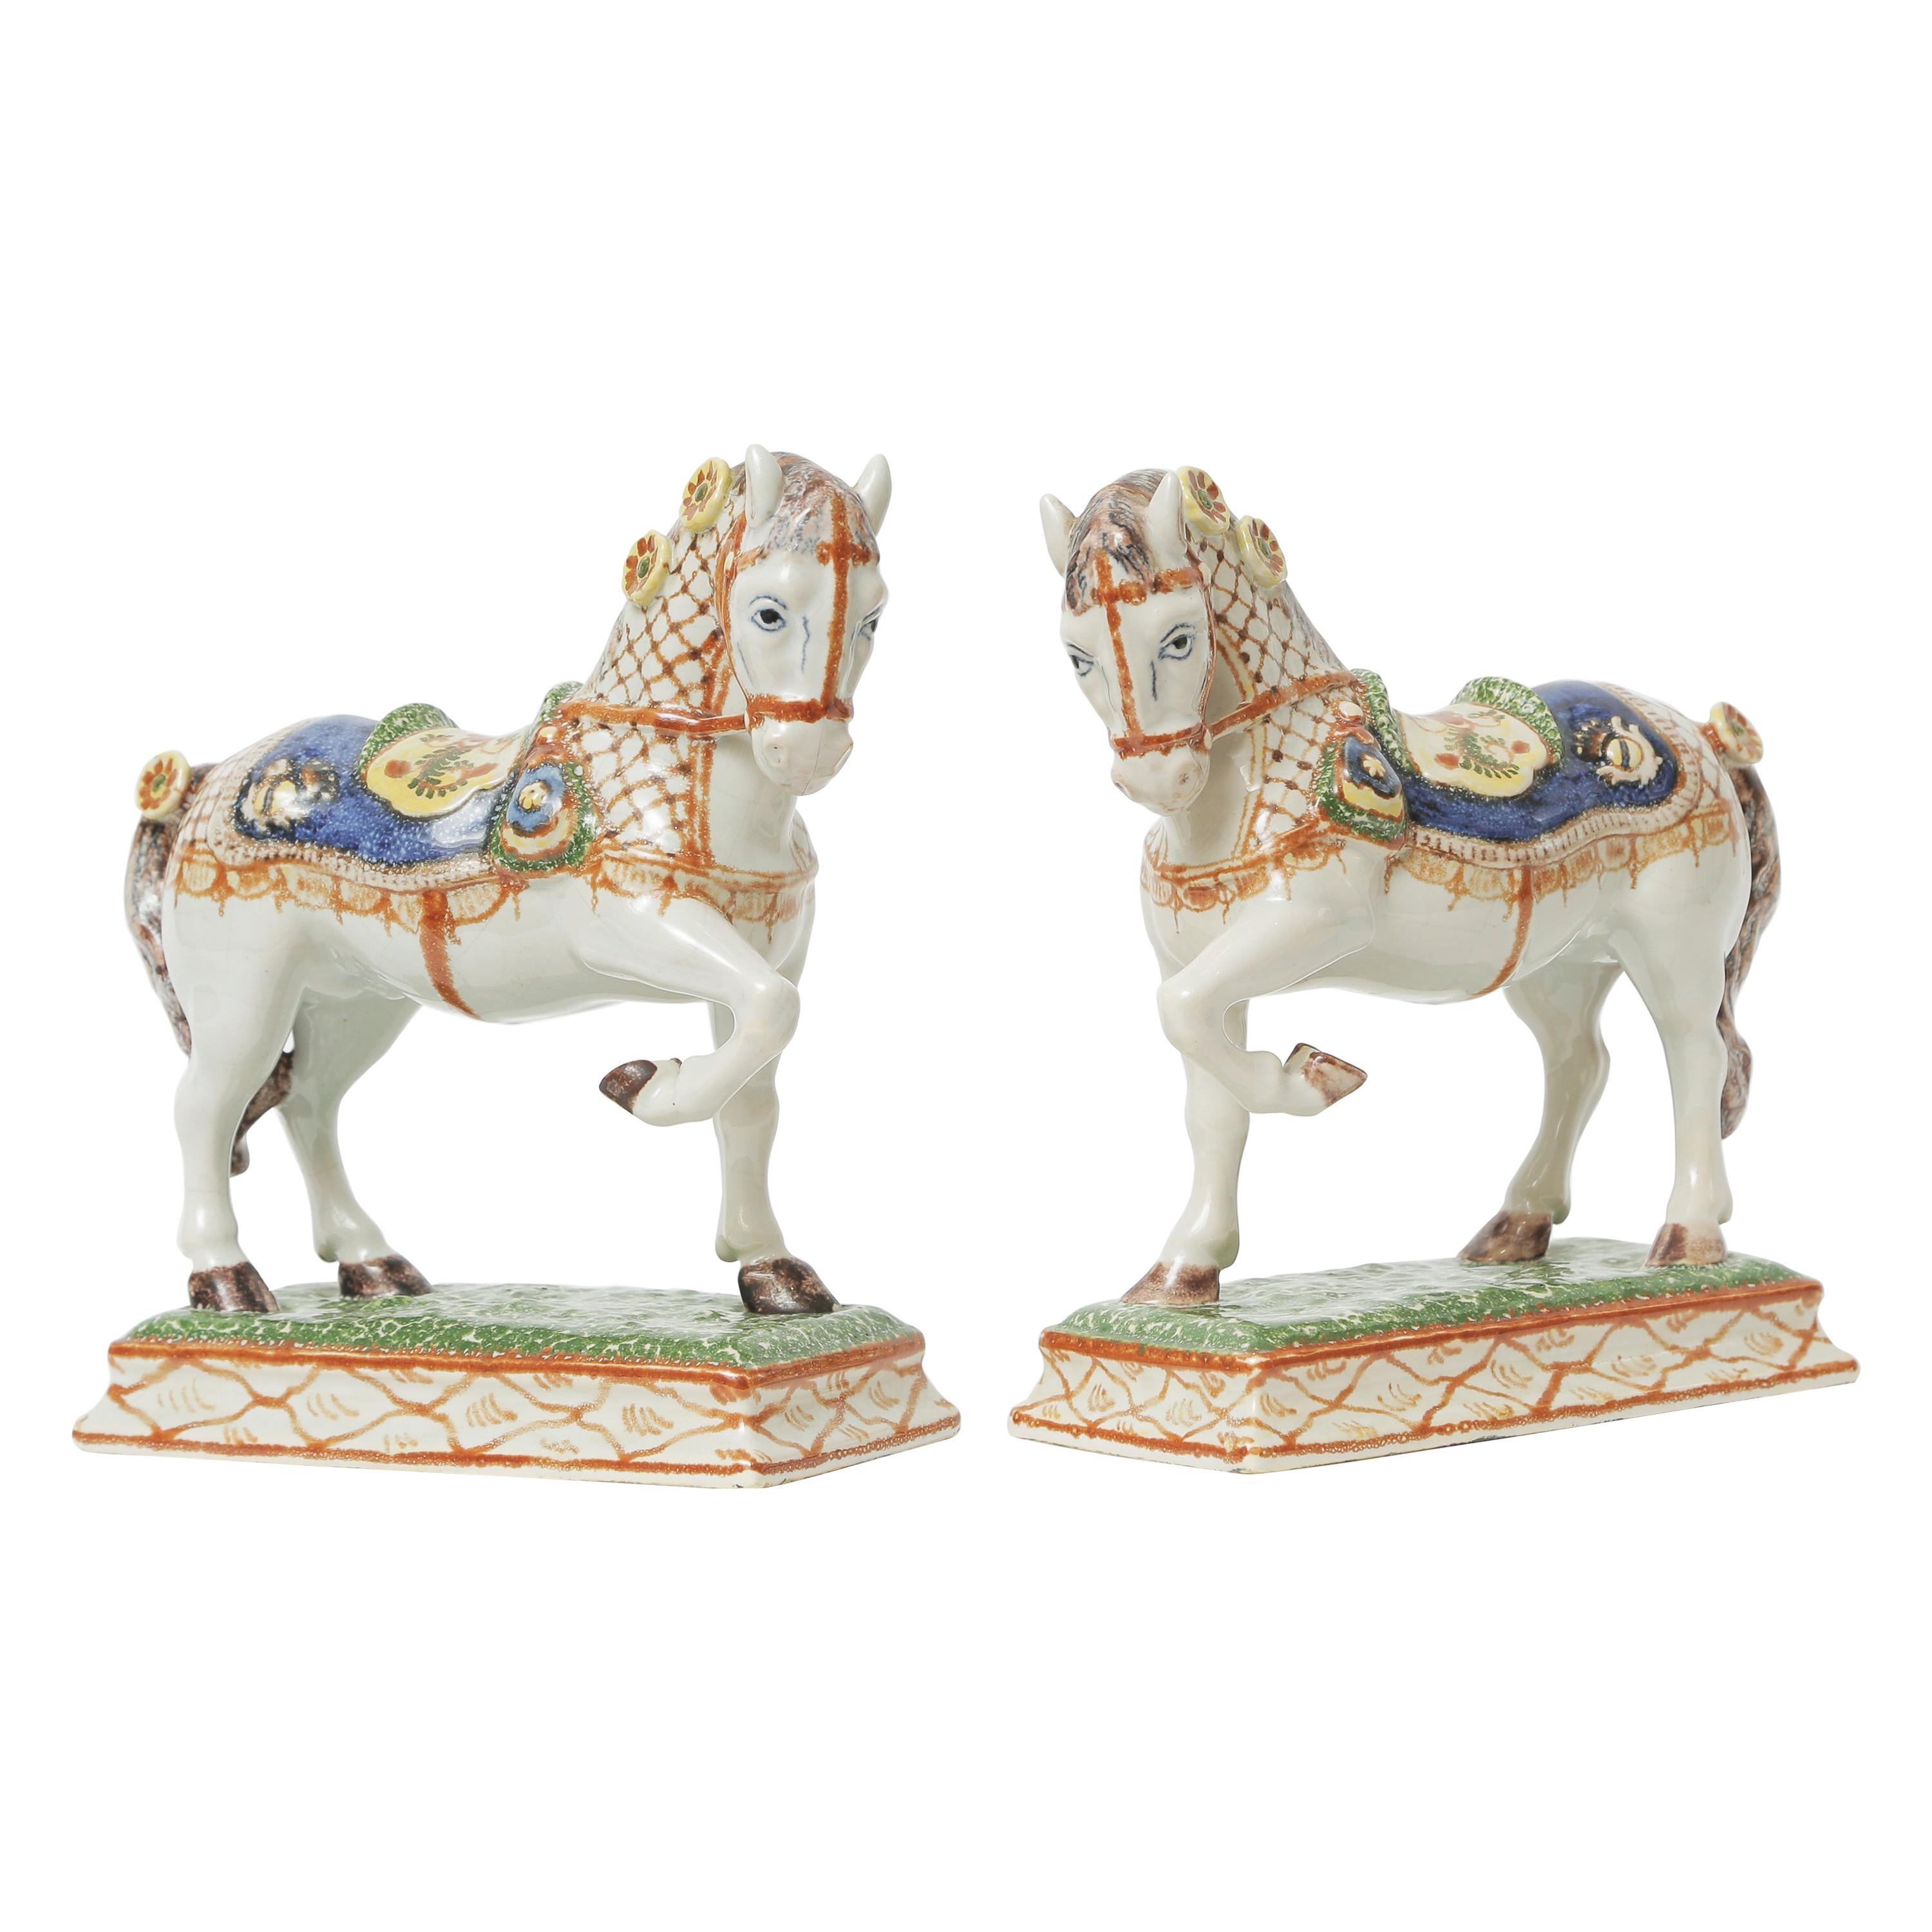 19th Century French Porcelain Horse Sculptures. Hand Painted Great Detail, Pair